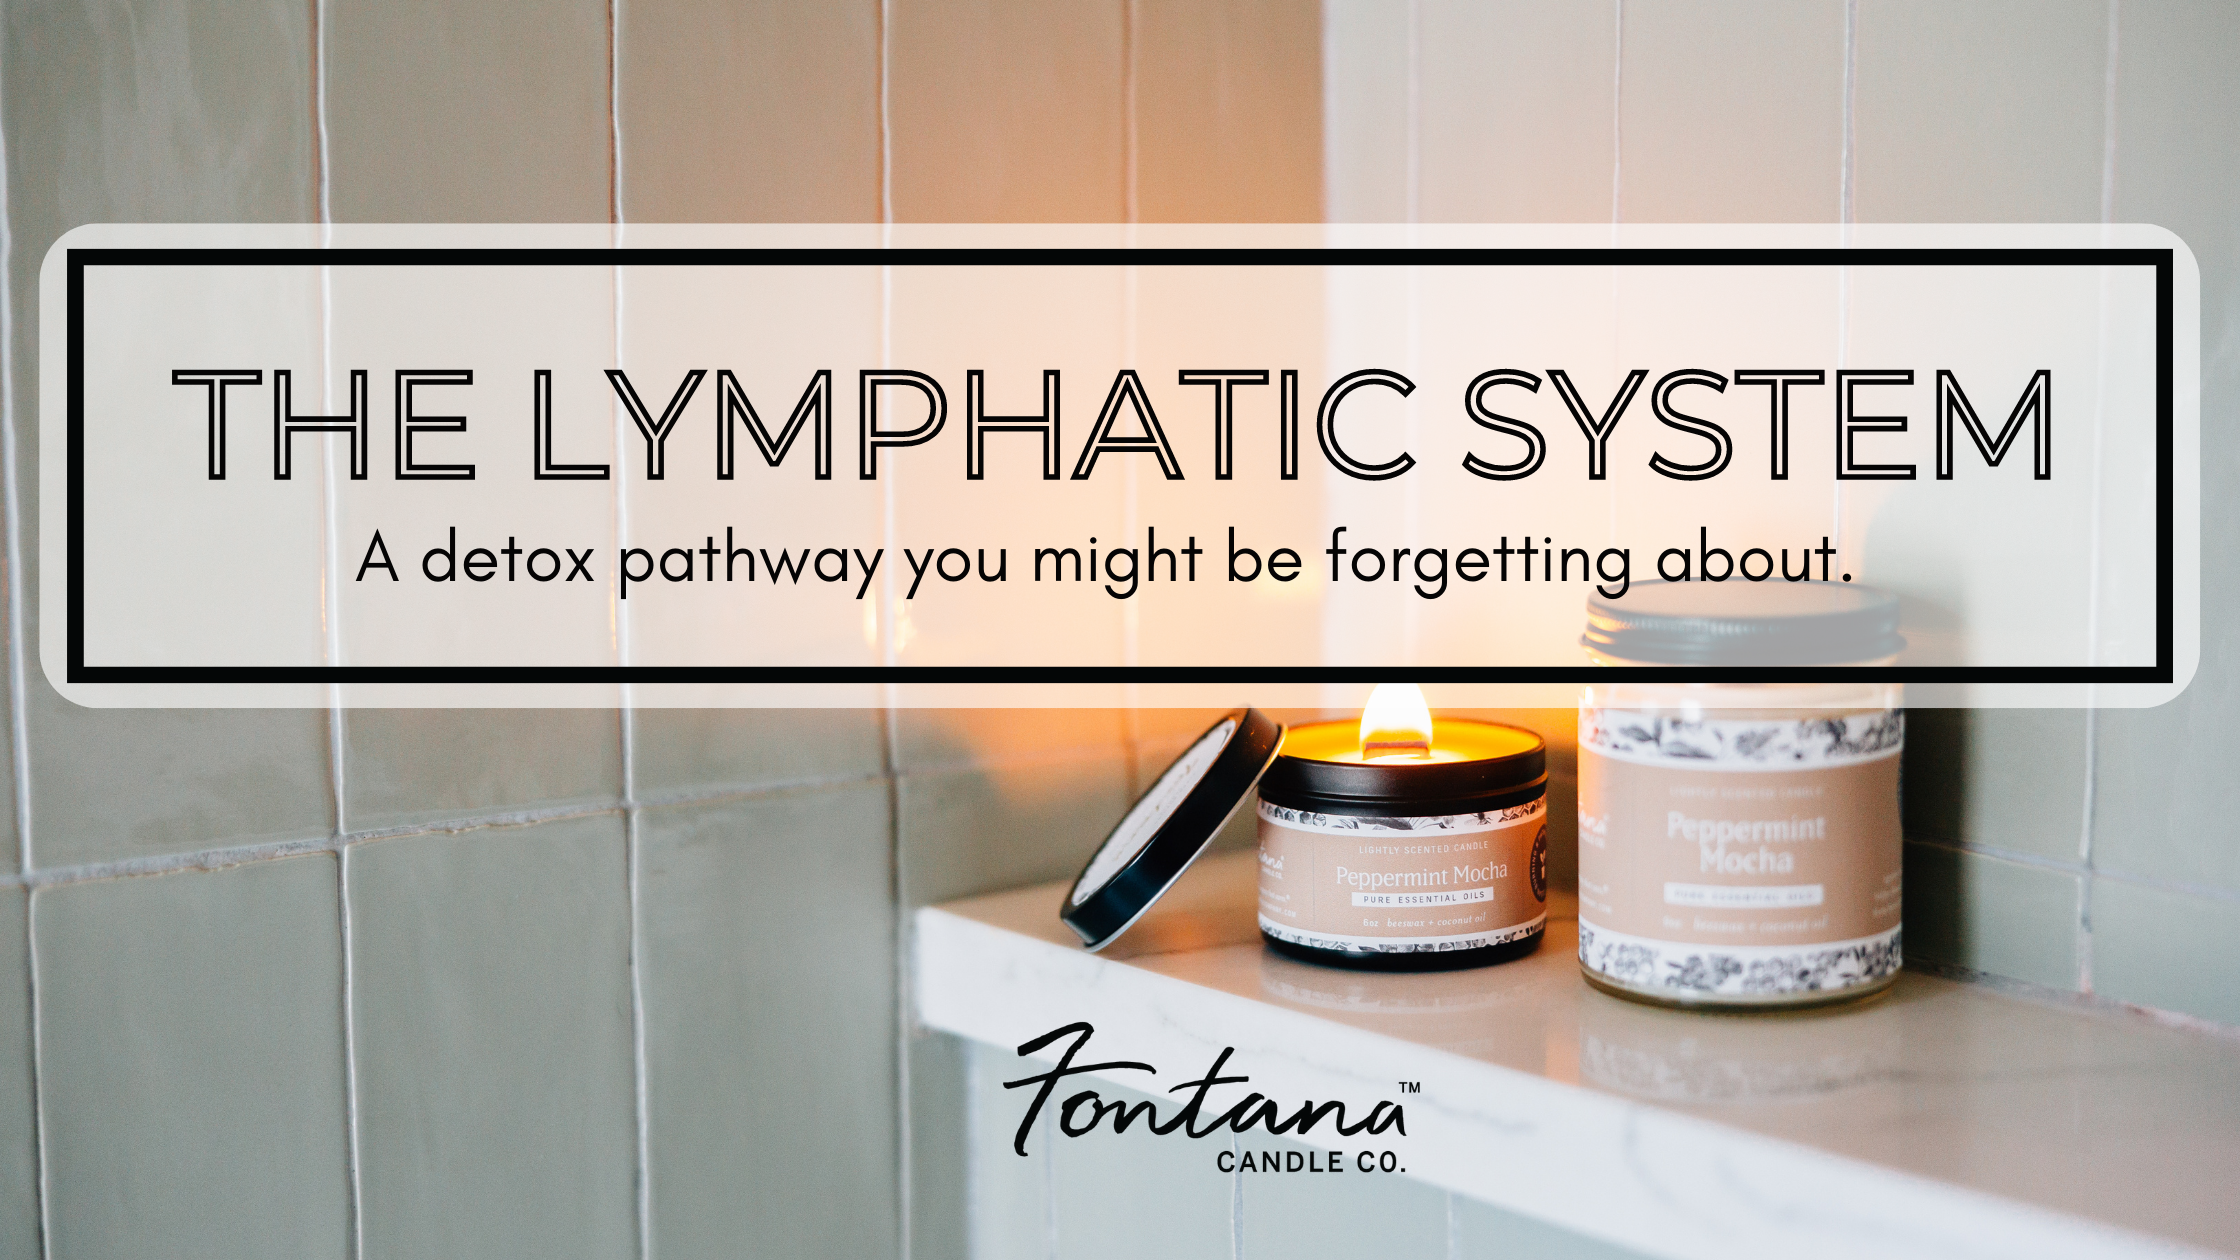 Lymphatic System: The detox pathway you might be forgetting about.